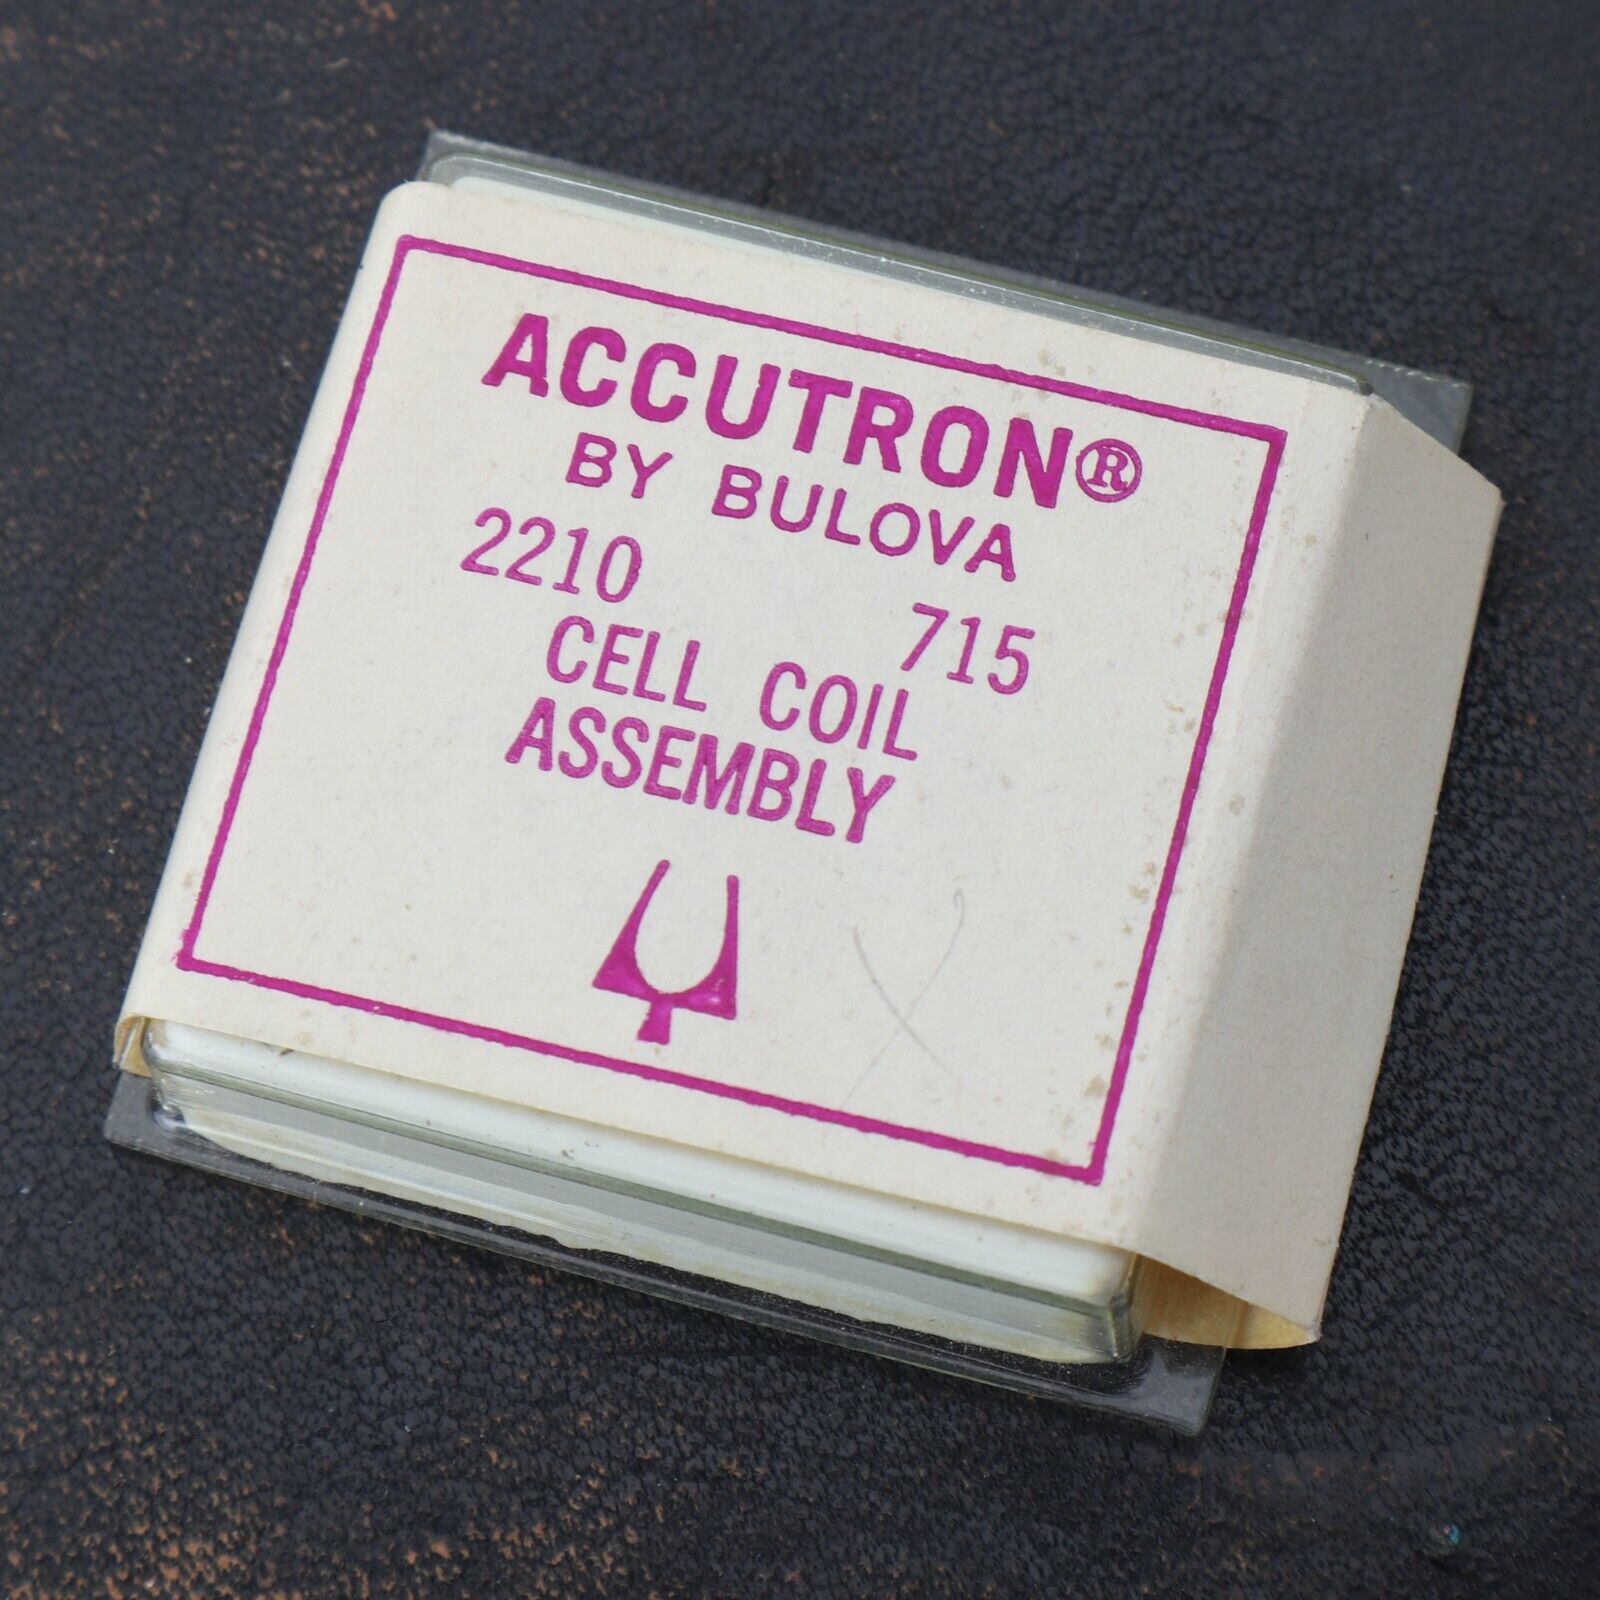 Accutron By Bulova 2210 Cell Coil Assembly #715 New Old Stock Original Package